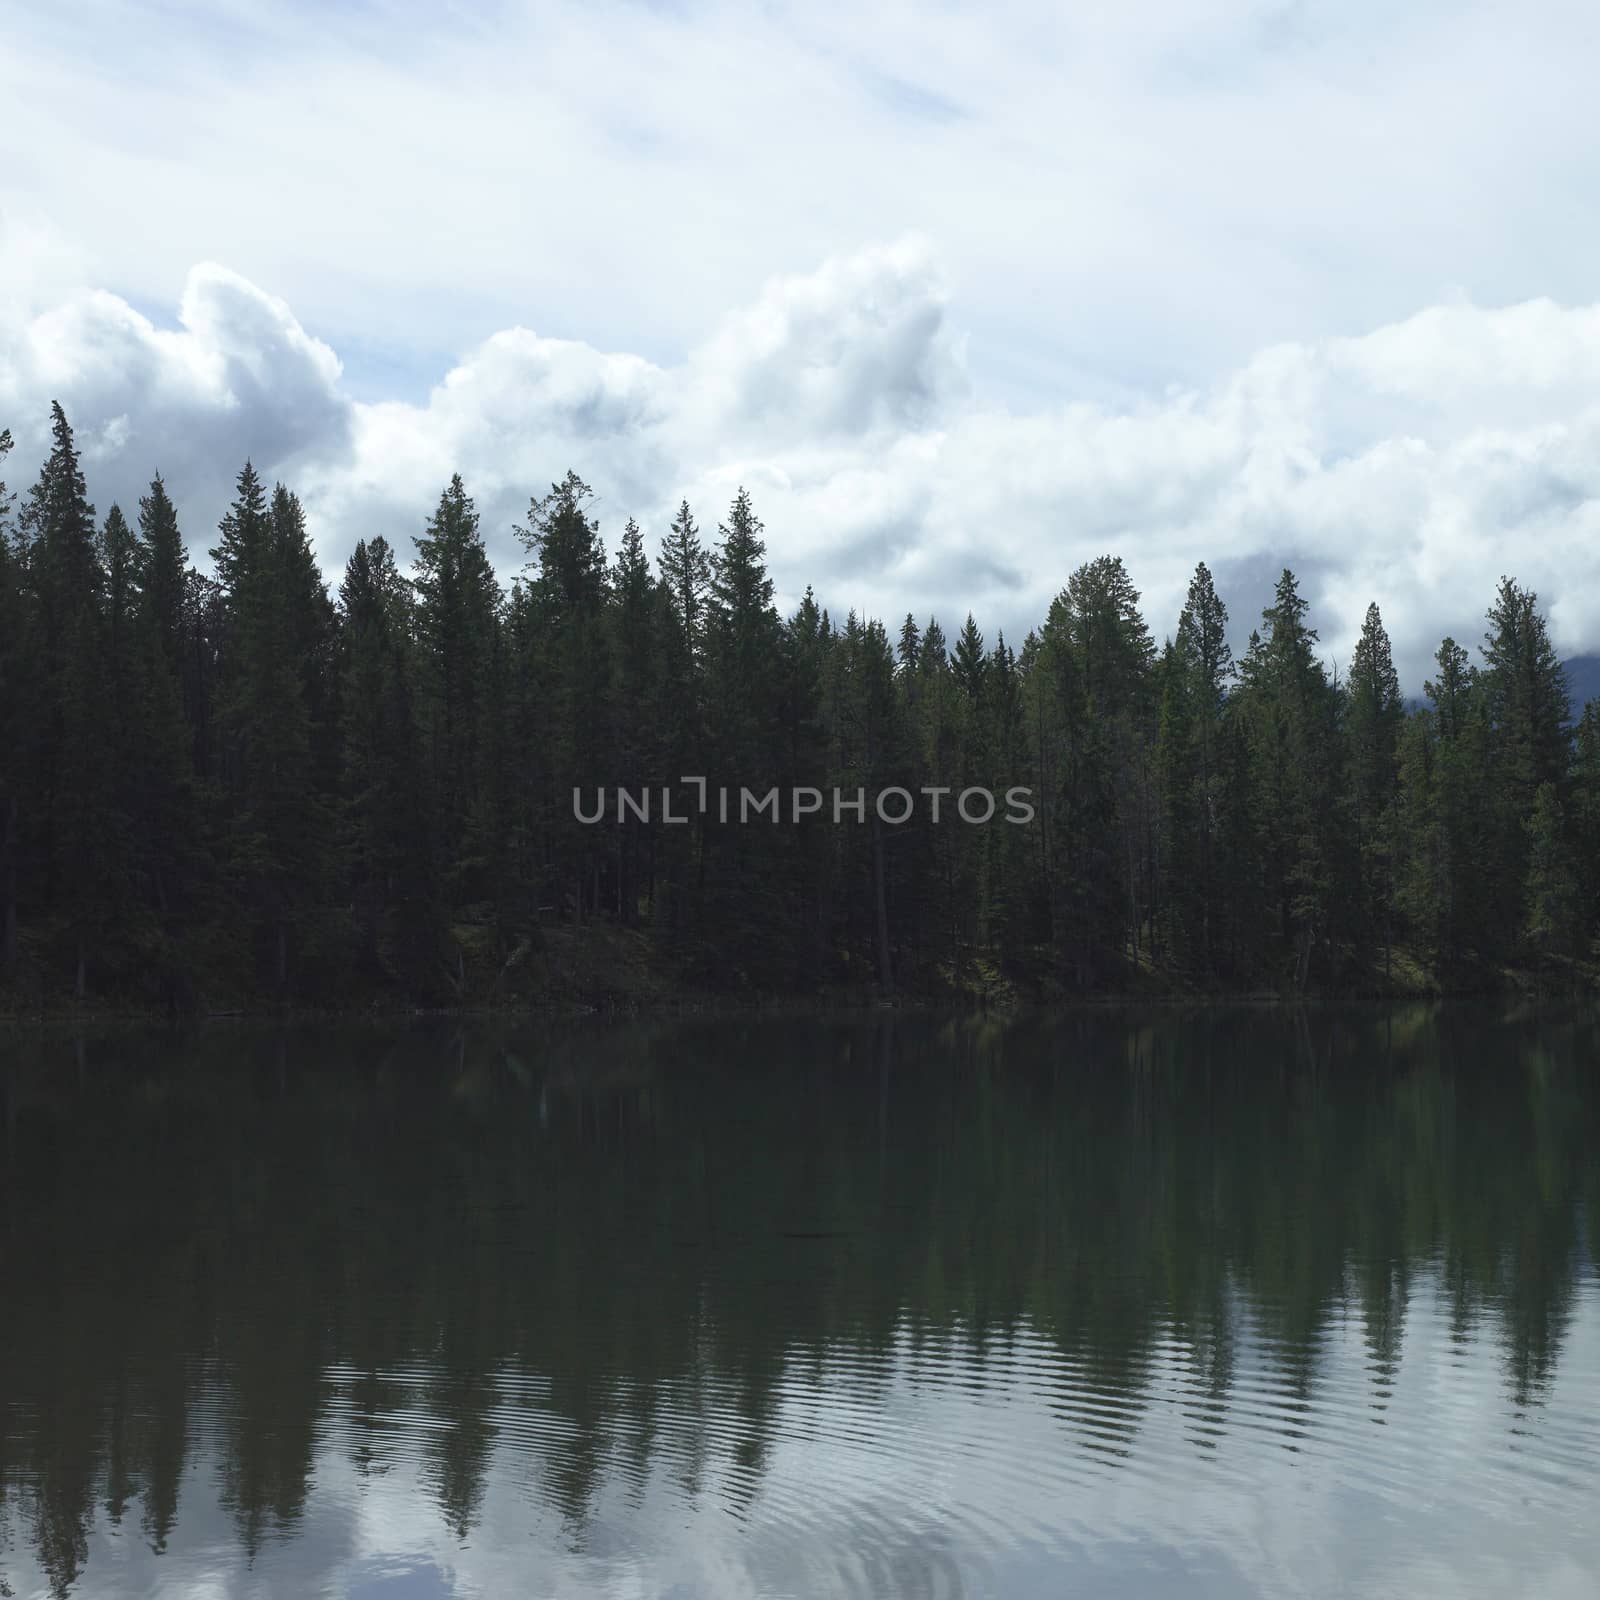 Evergreens reflect into a calm lake under a cloudy sky